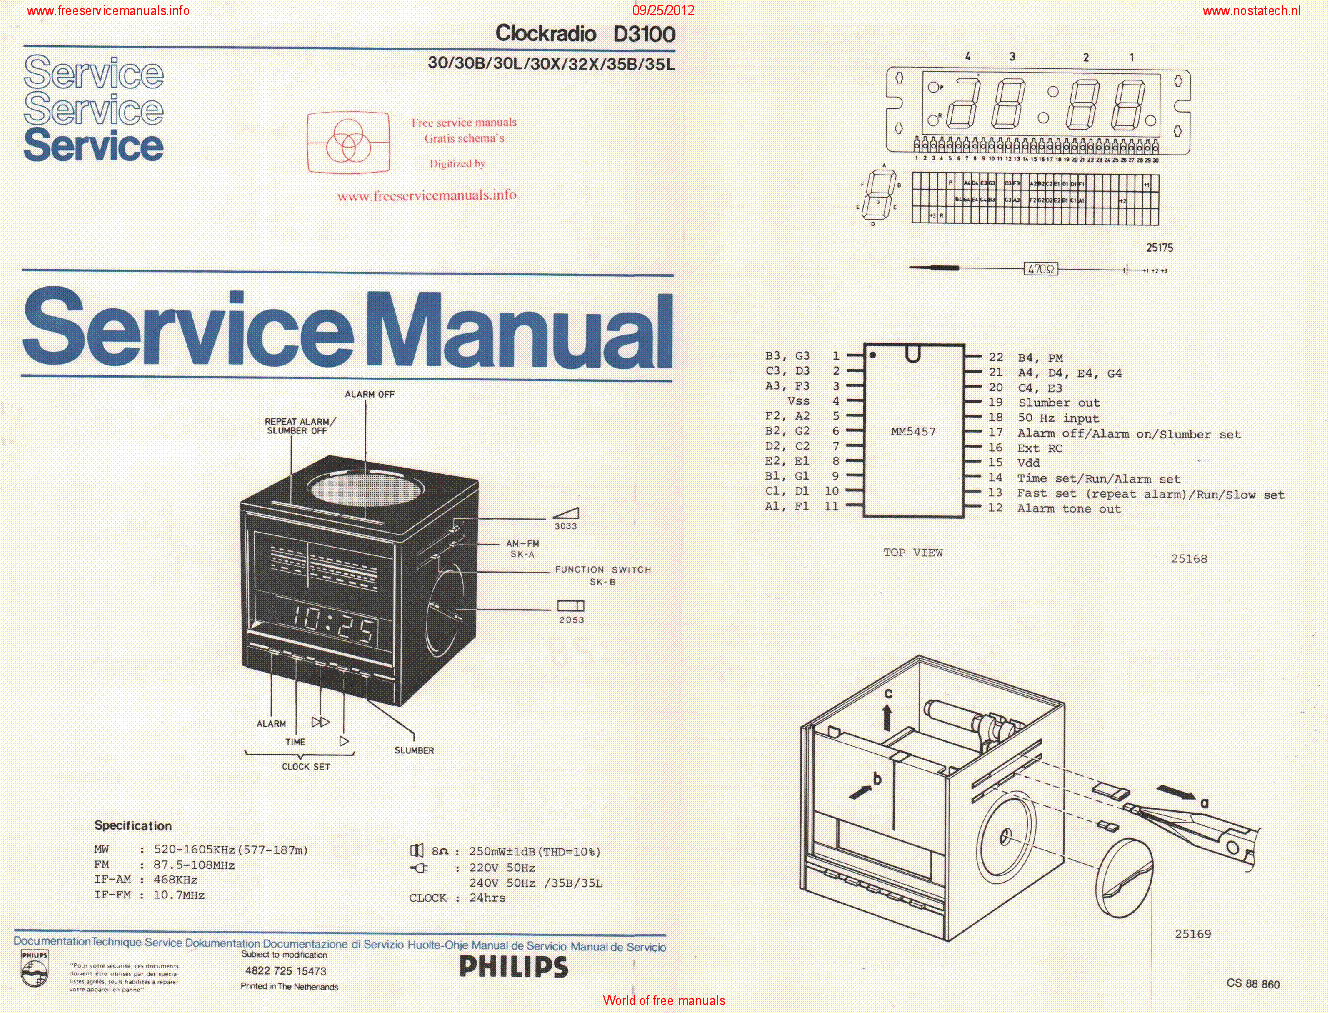 PHILIPS D3100 CLOCKRADIO service manual (1st page)